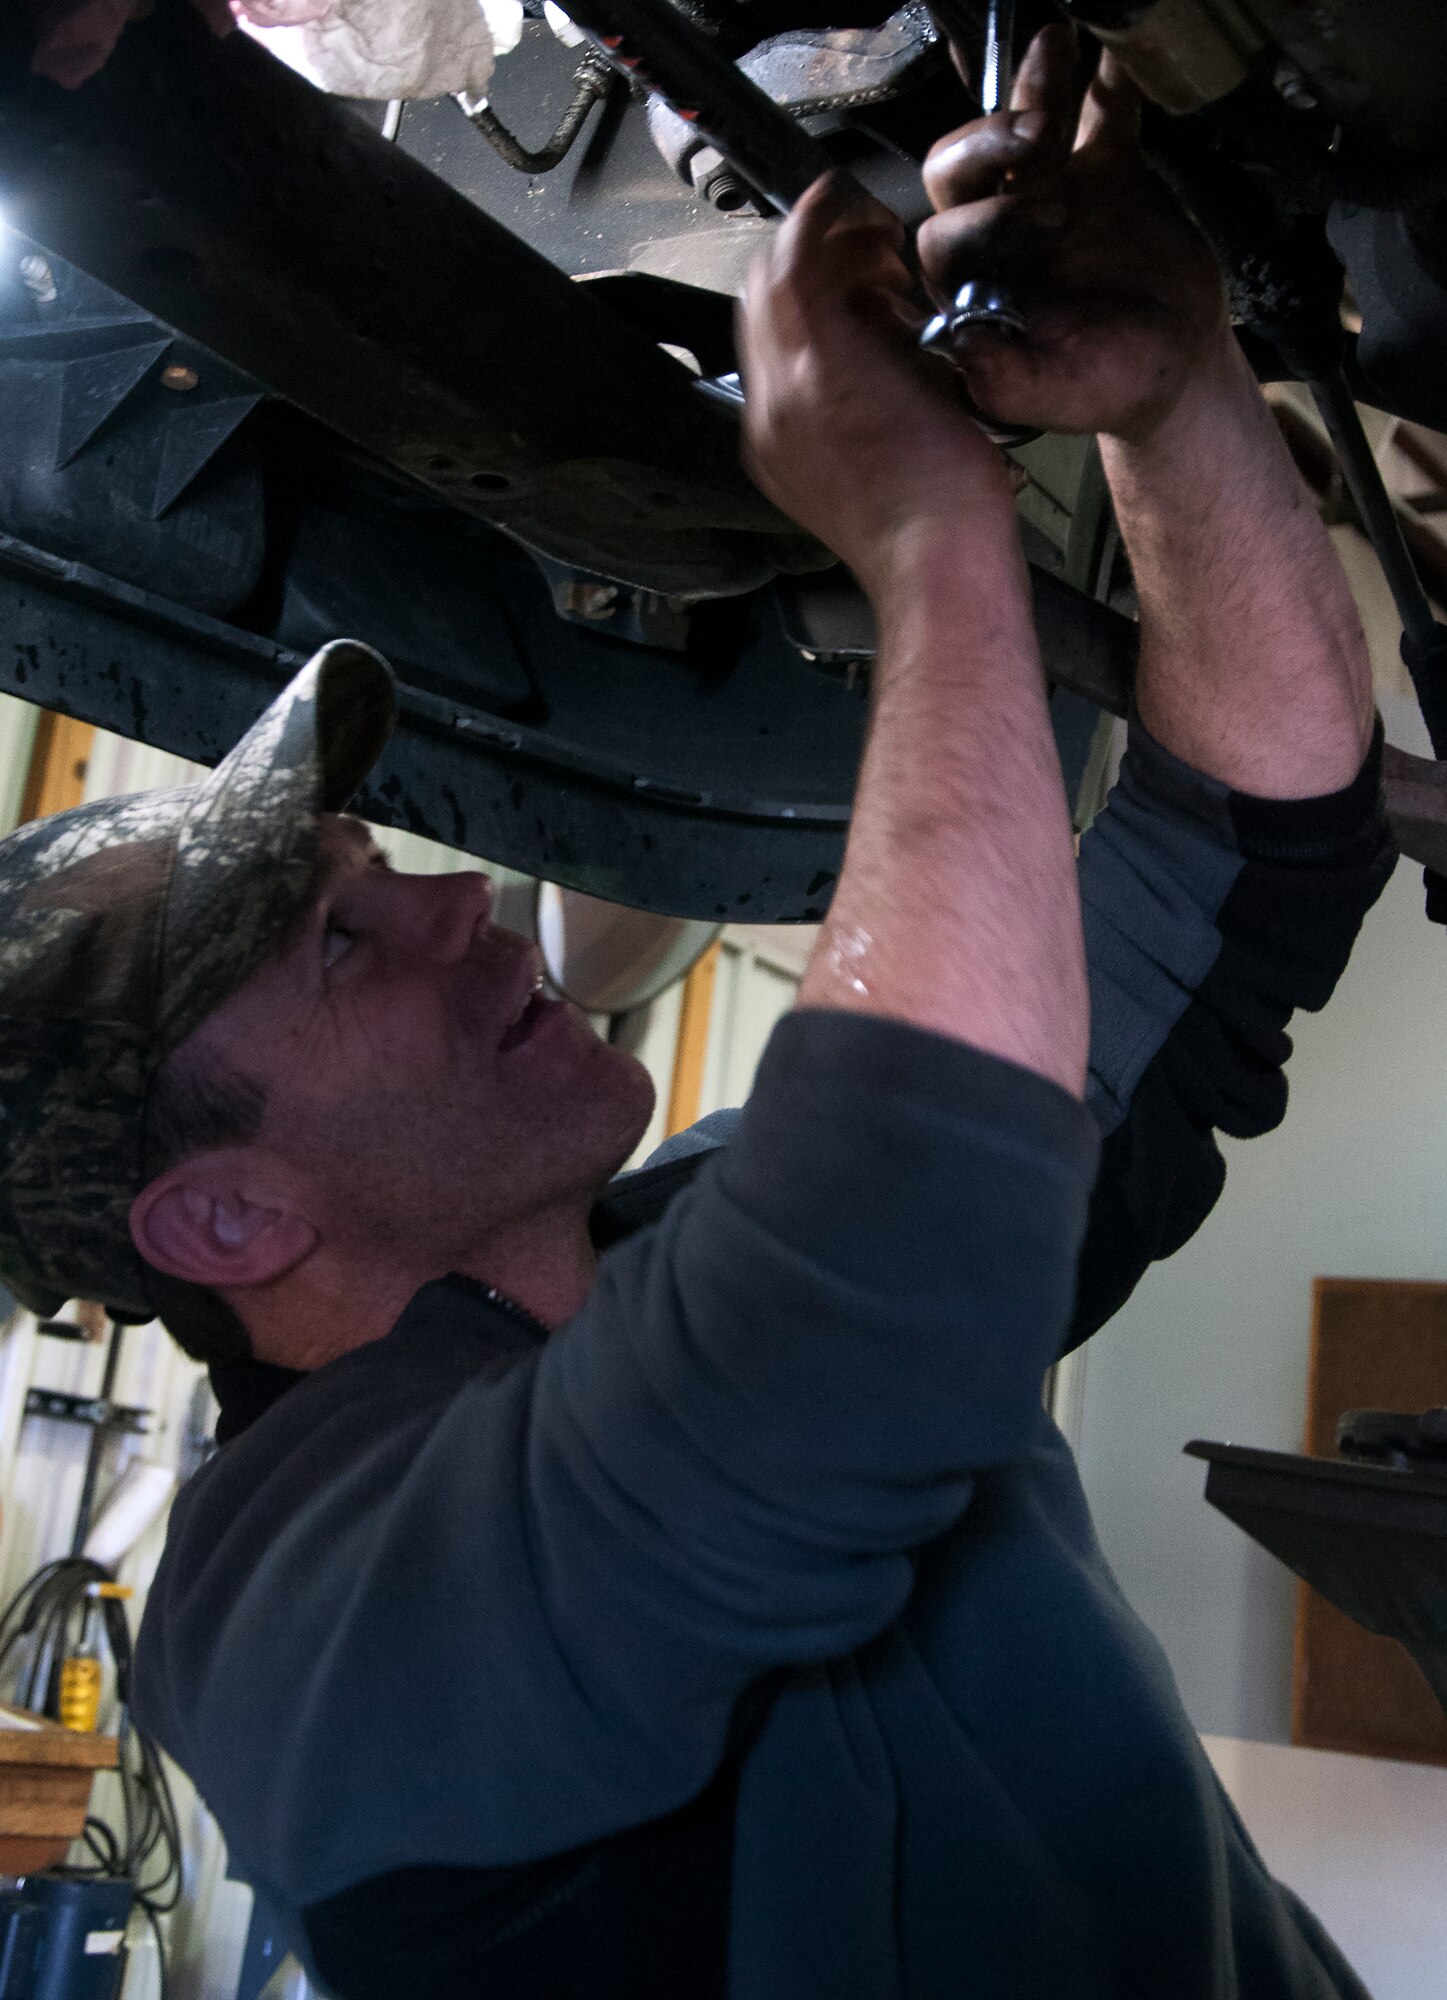 Retired Tech. Sgt. Timothy Staples removes a bolt from the underside of a truck Nov. 13, 2015, in the Auto Skills Shop on F.E. Warren Air Force Base, Wyo. With access to lifts and tools, Airmen and retirees can work on vehicles without needing to go to a mechanic. (U.S. Air Force photo by Senior Airman Brandon Valle)